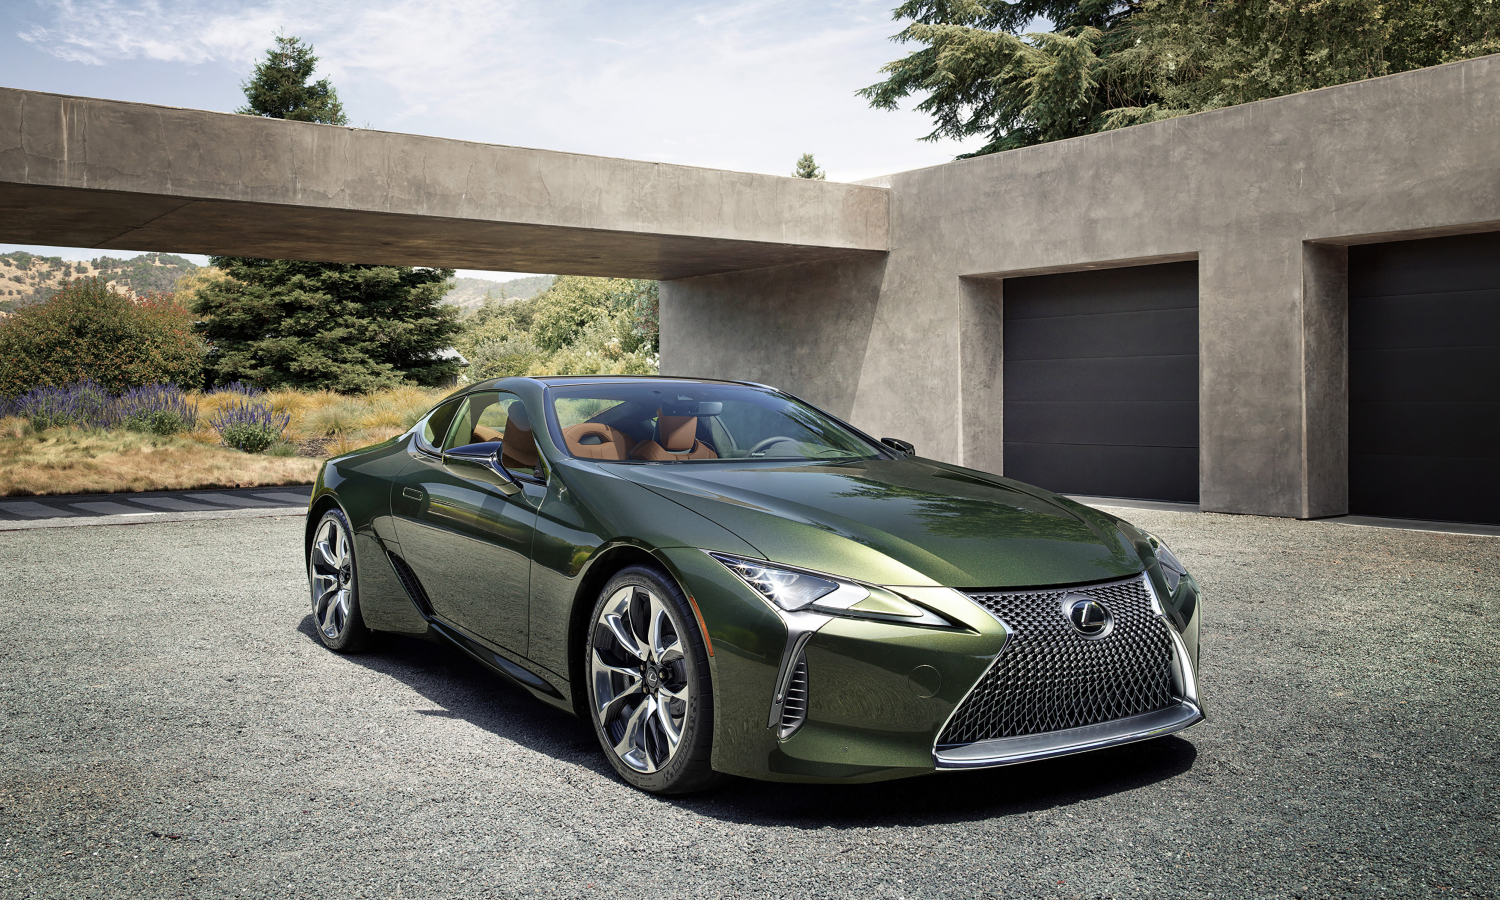 2020 Lexus LC 500 Inspiration Series Pairs Classic Color Palette with  Cutting Edge Design - Lexus USA Newsroom